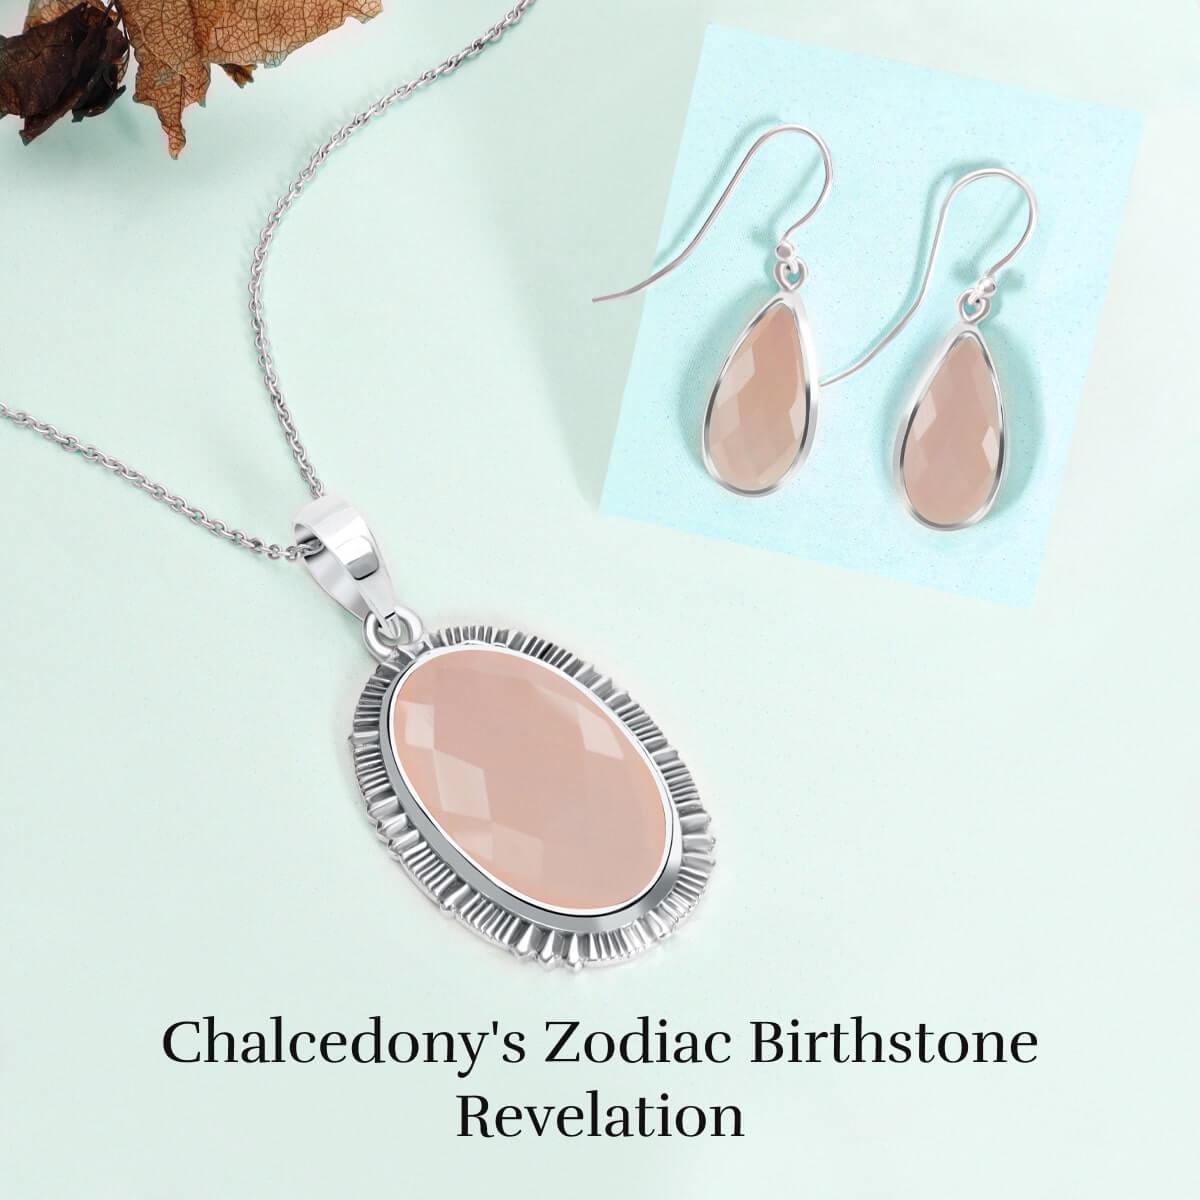 Chalcedony is The Birthstone of Which Zodiac Sign